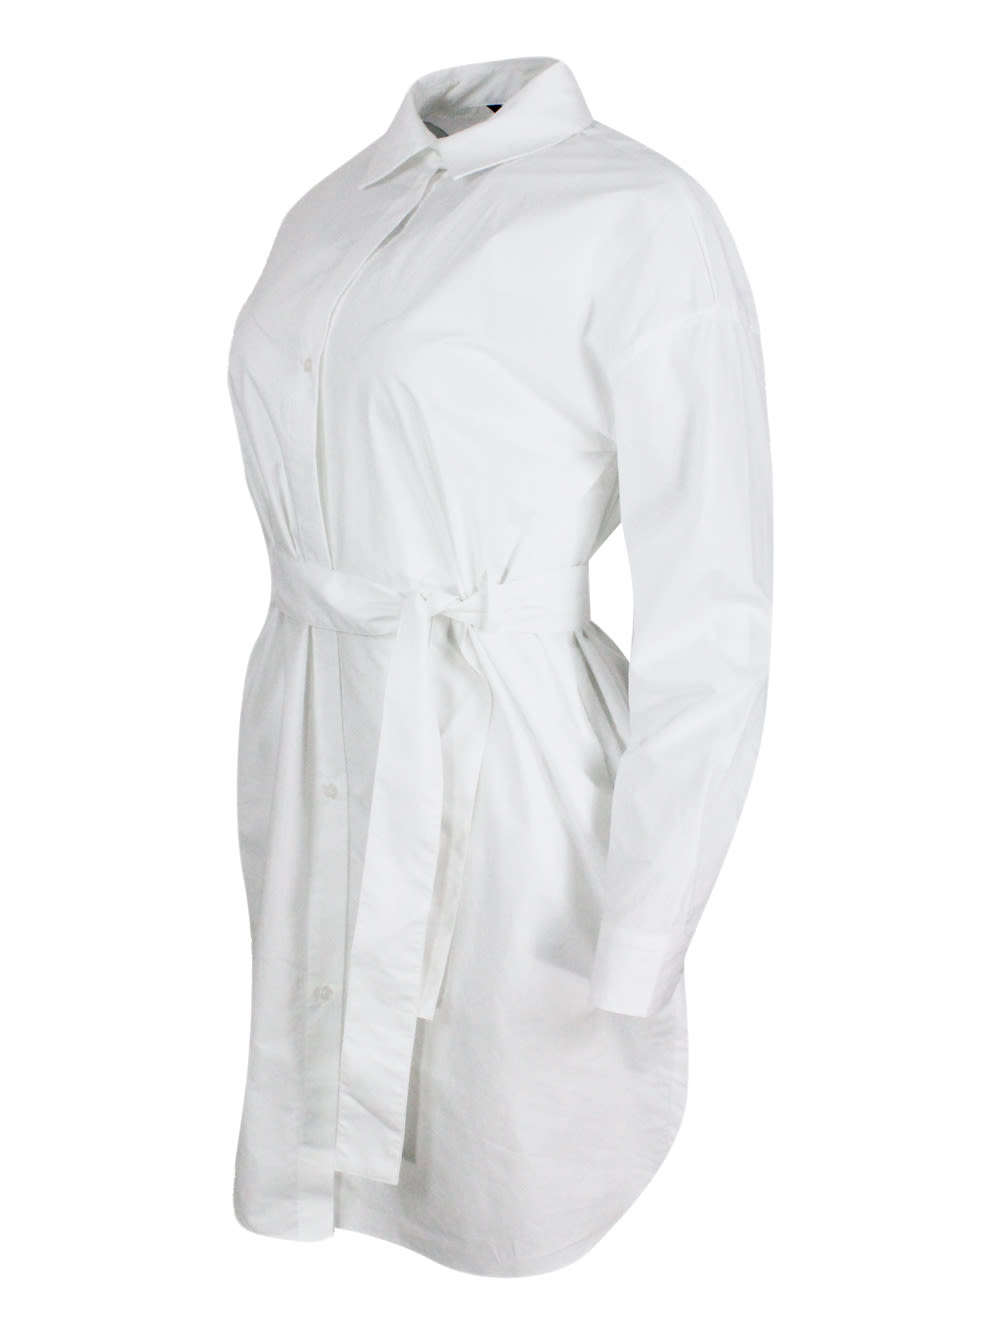 Shop Armani Collezioni Dress Made Of Soft Cotton With Long Sleeves, With Button Closure On The Front And Belt. In White